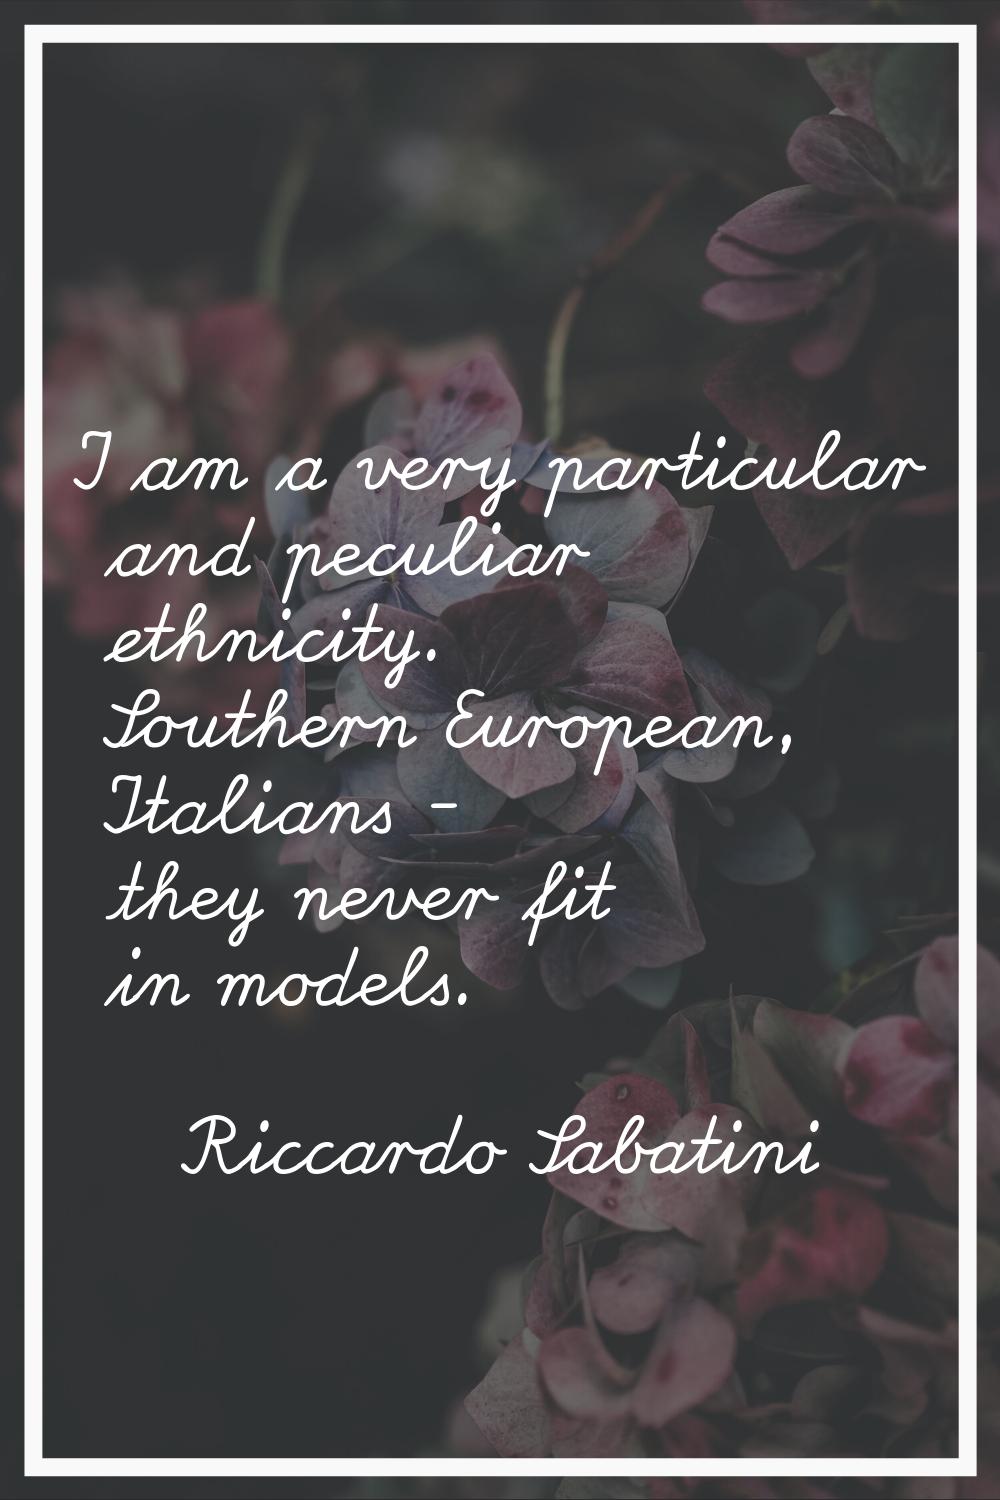 I am a very particular and peculiar ethnicity. Southern European, Italians - they never fit in mode